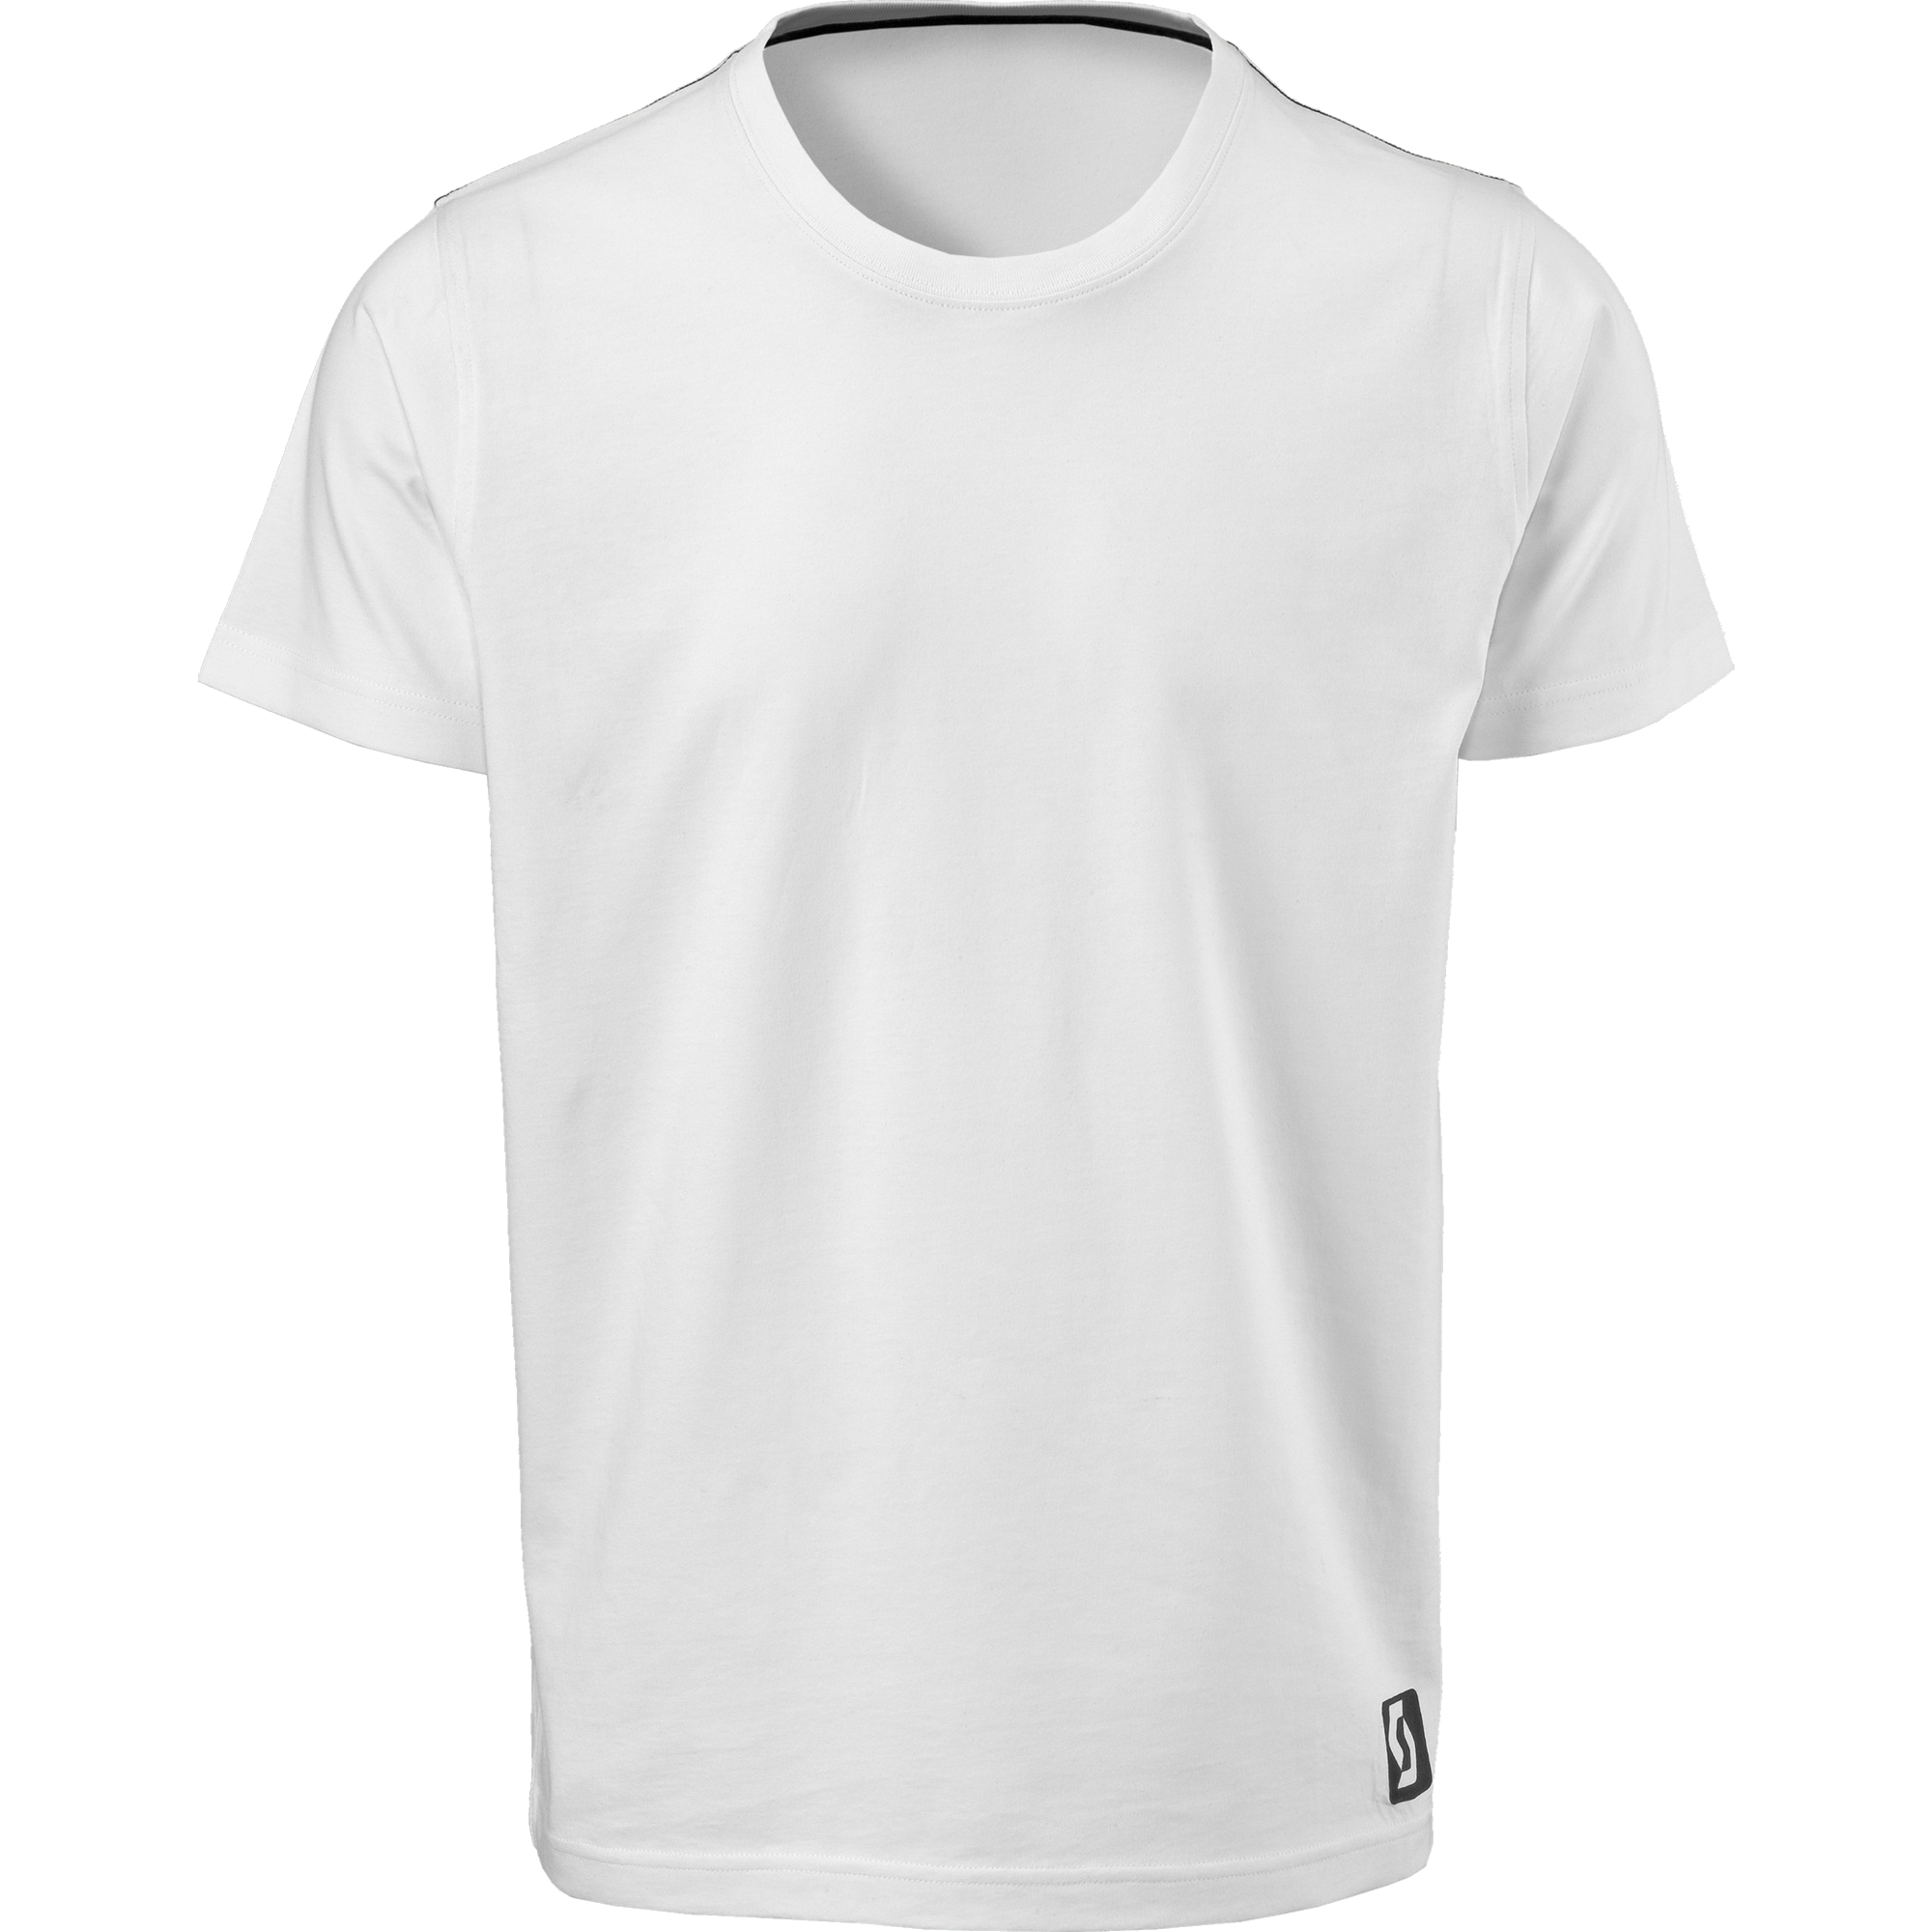 Plain White T Shirt Png Hd / In this category tshirt we have 121 free